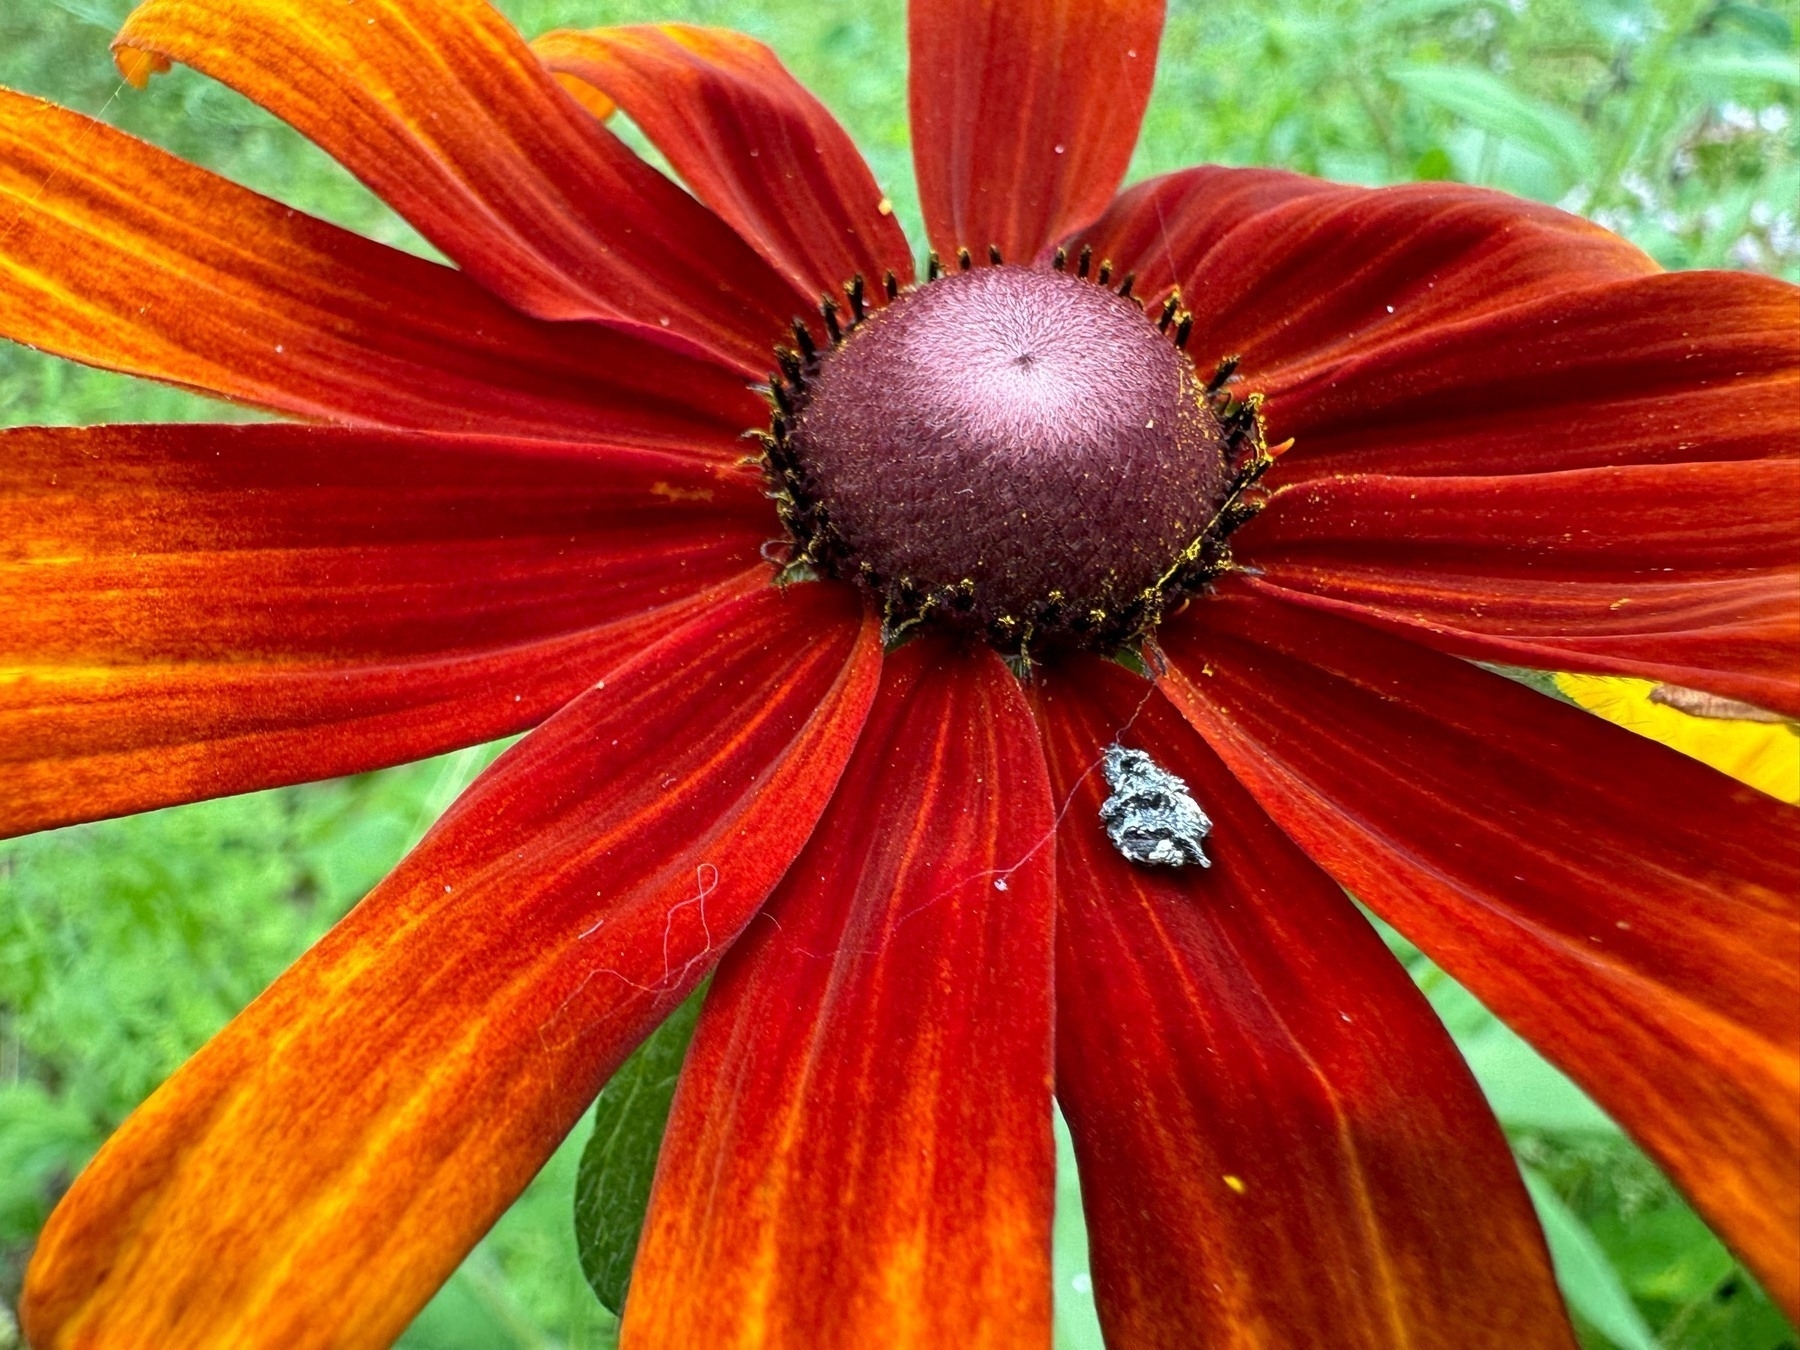 A vibrant red and orange flower with a dark center is adorned with a small insect resting on one of its petals.